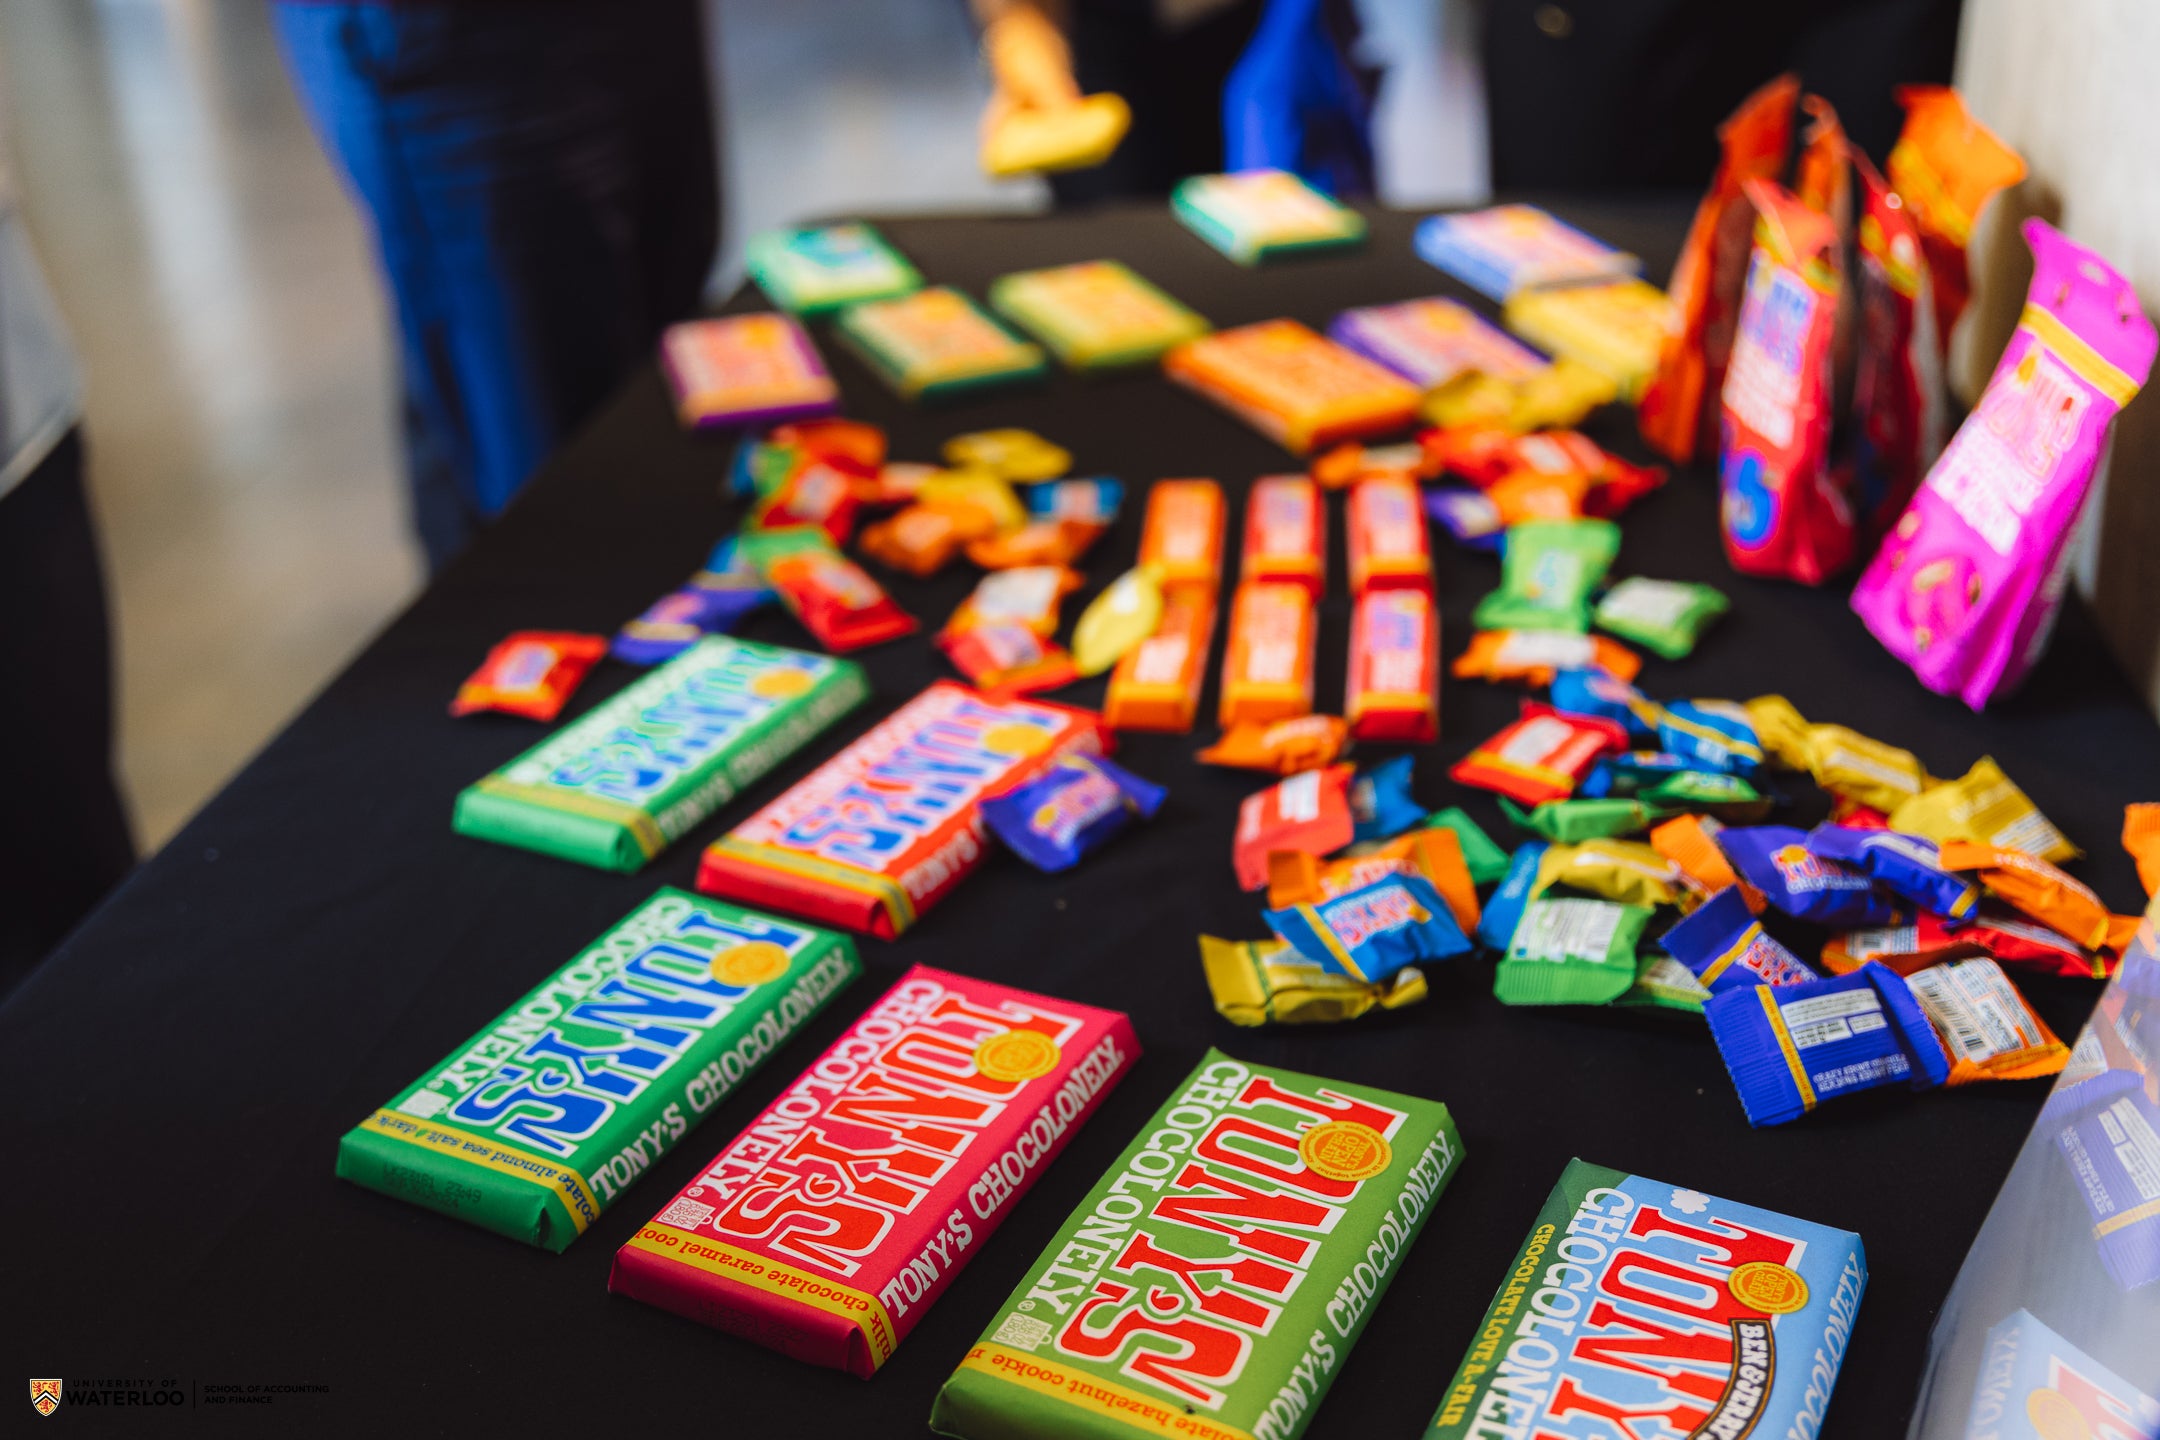 Colourful chocolate bars from Tony's Chocolonely